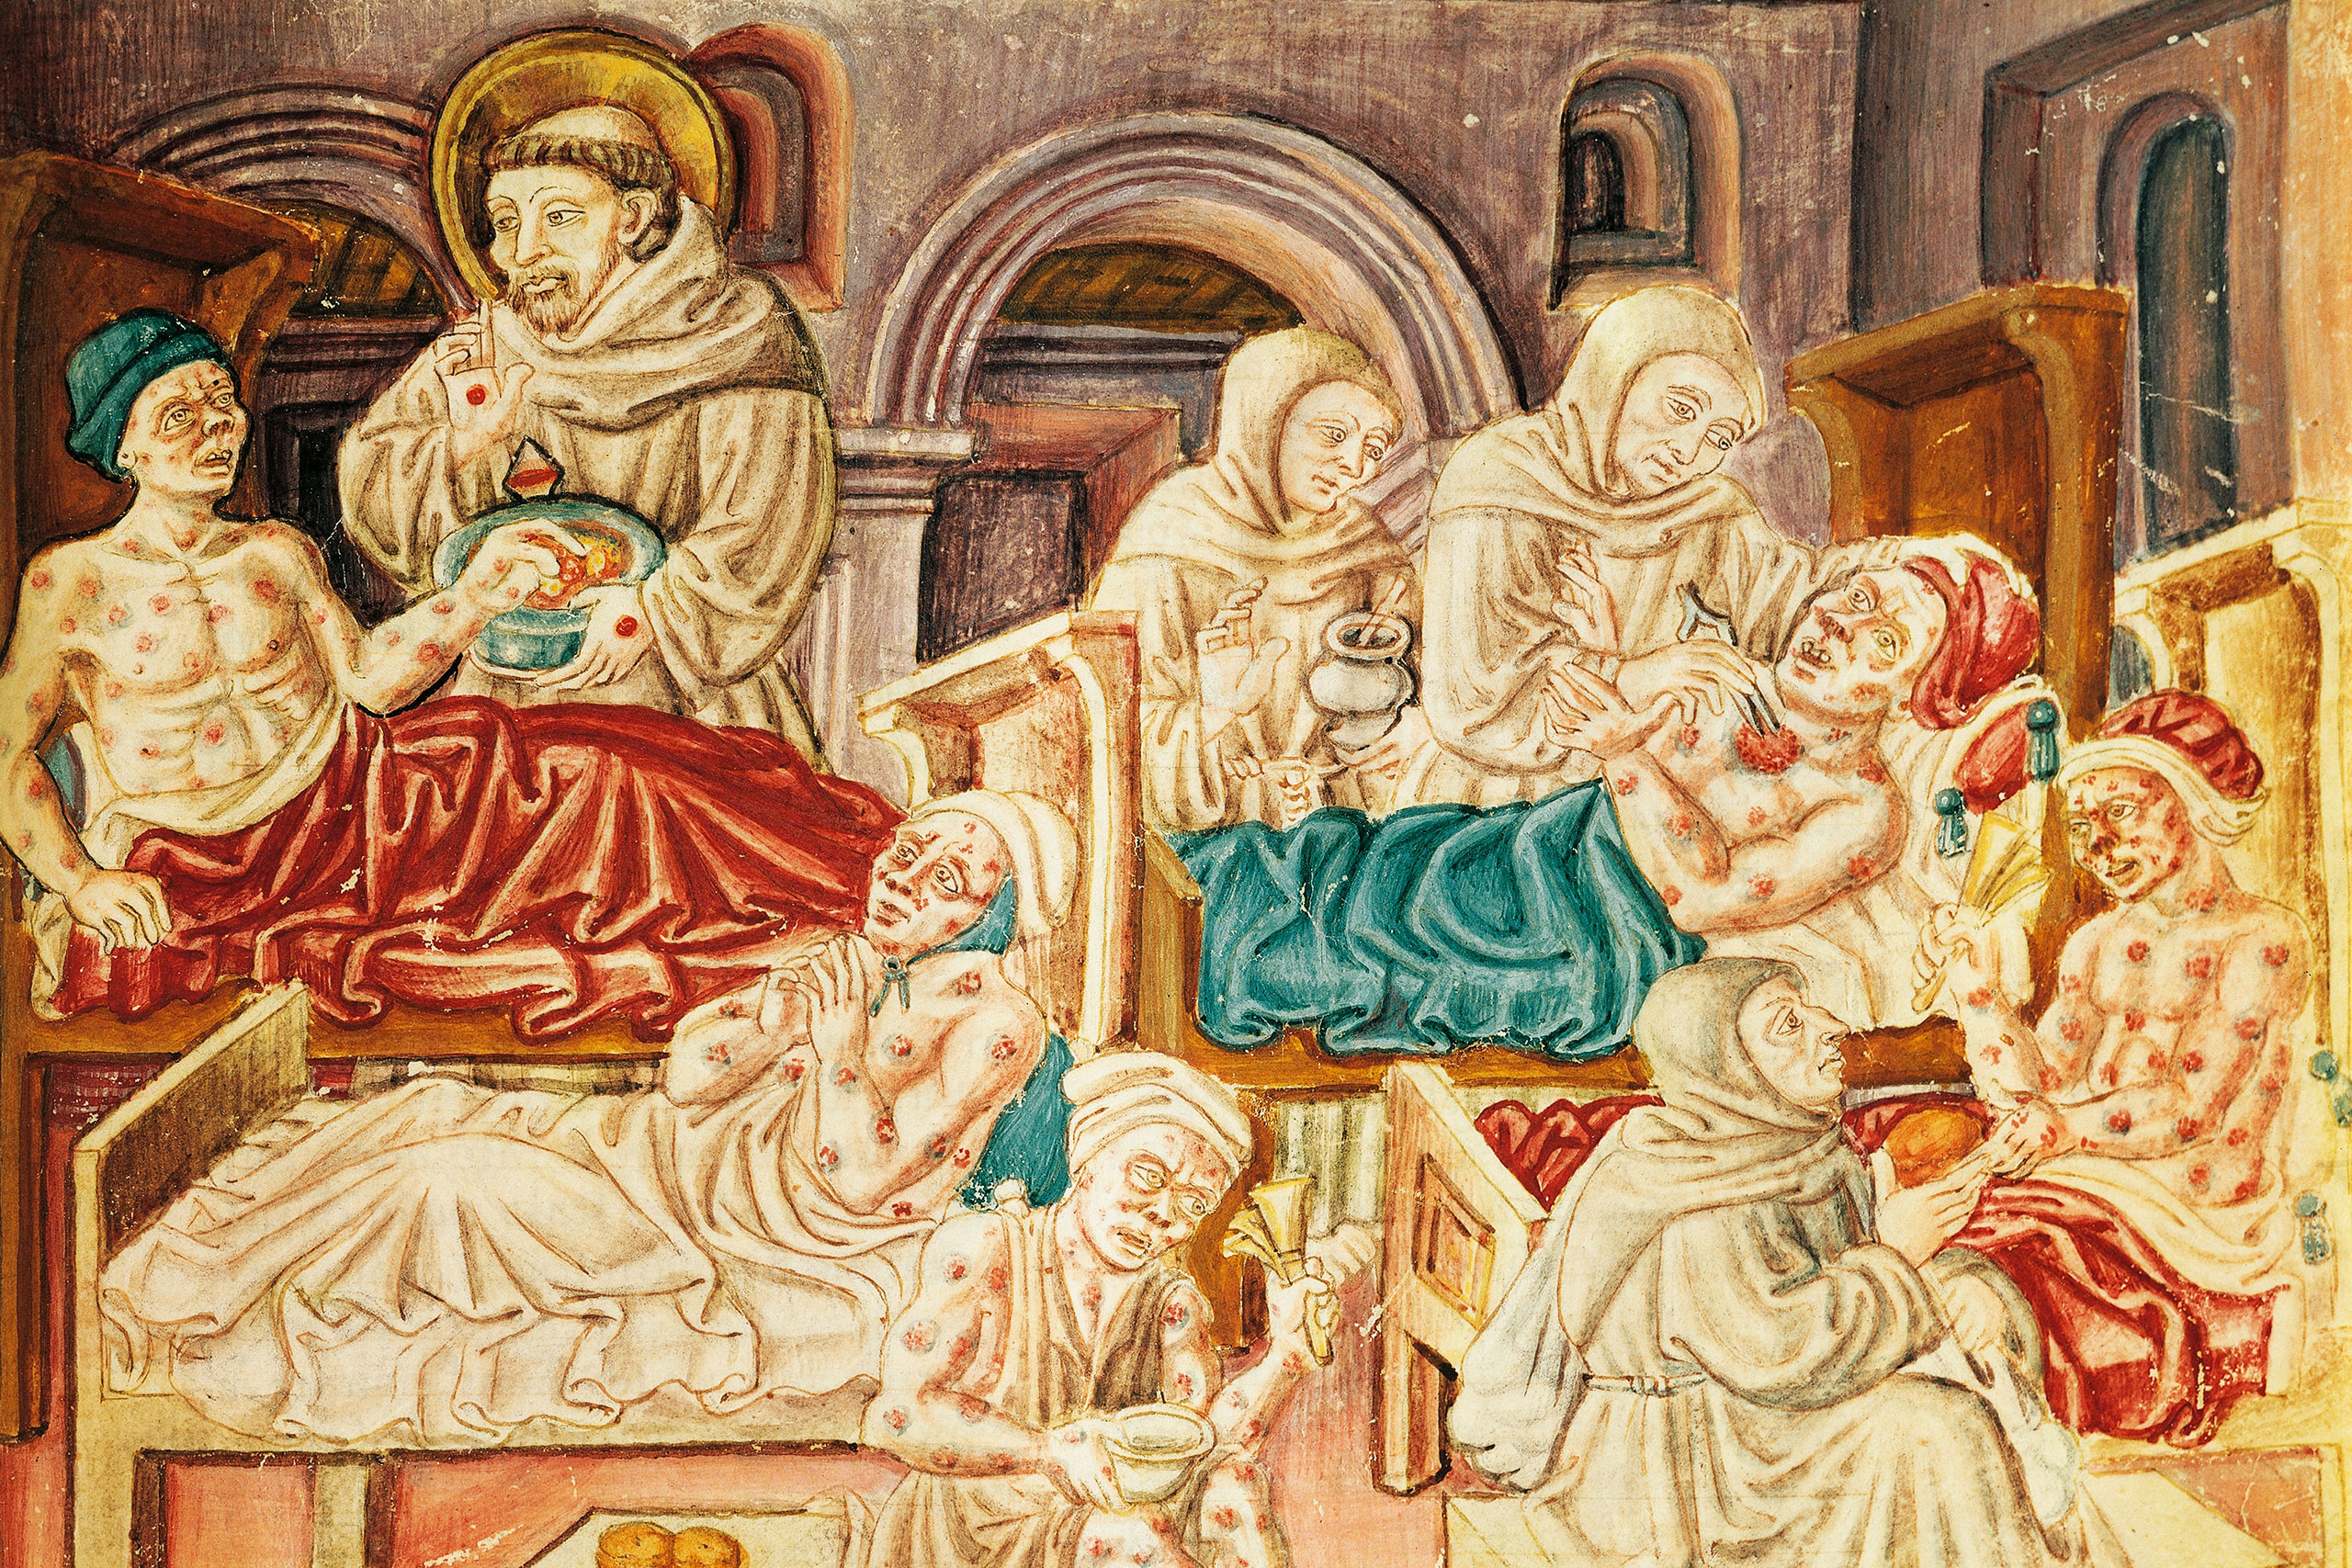 Anti-Vaxxers Would Love the Middle Ages